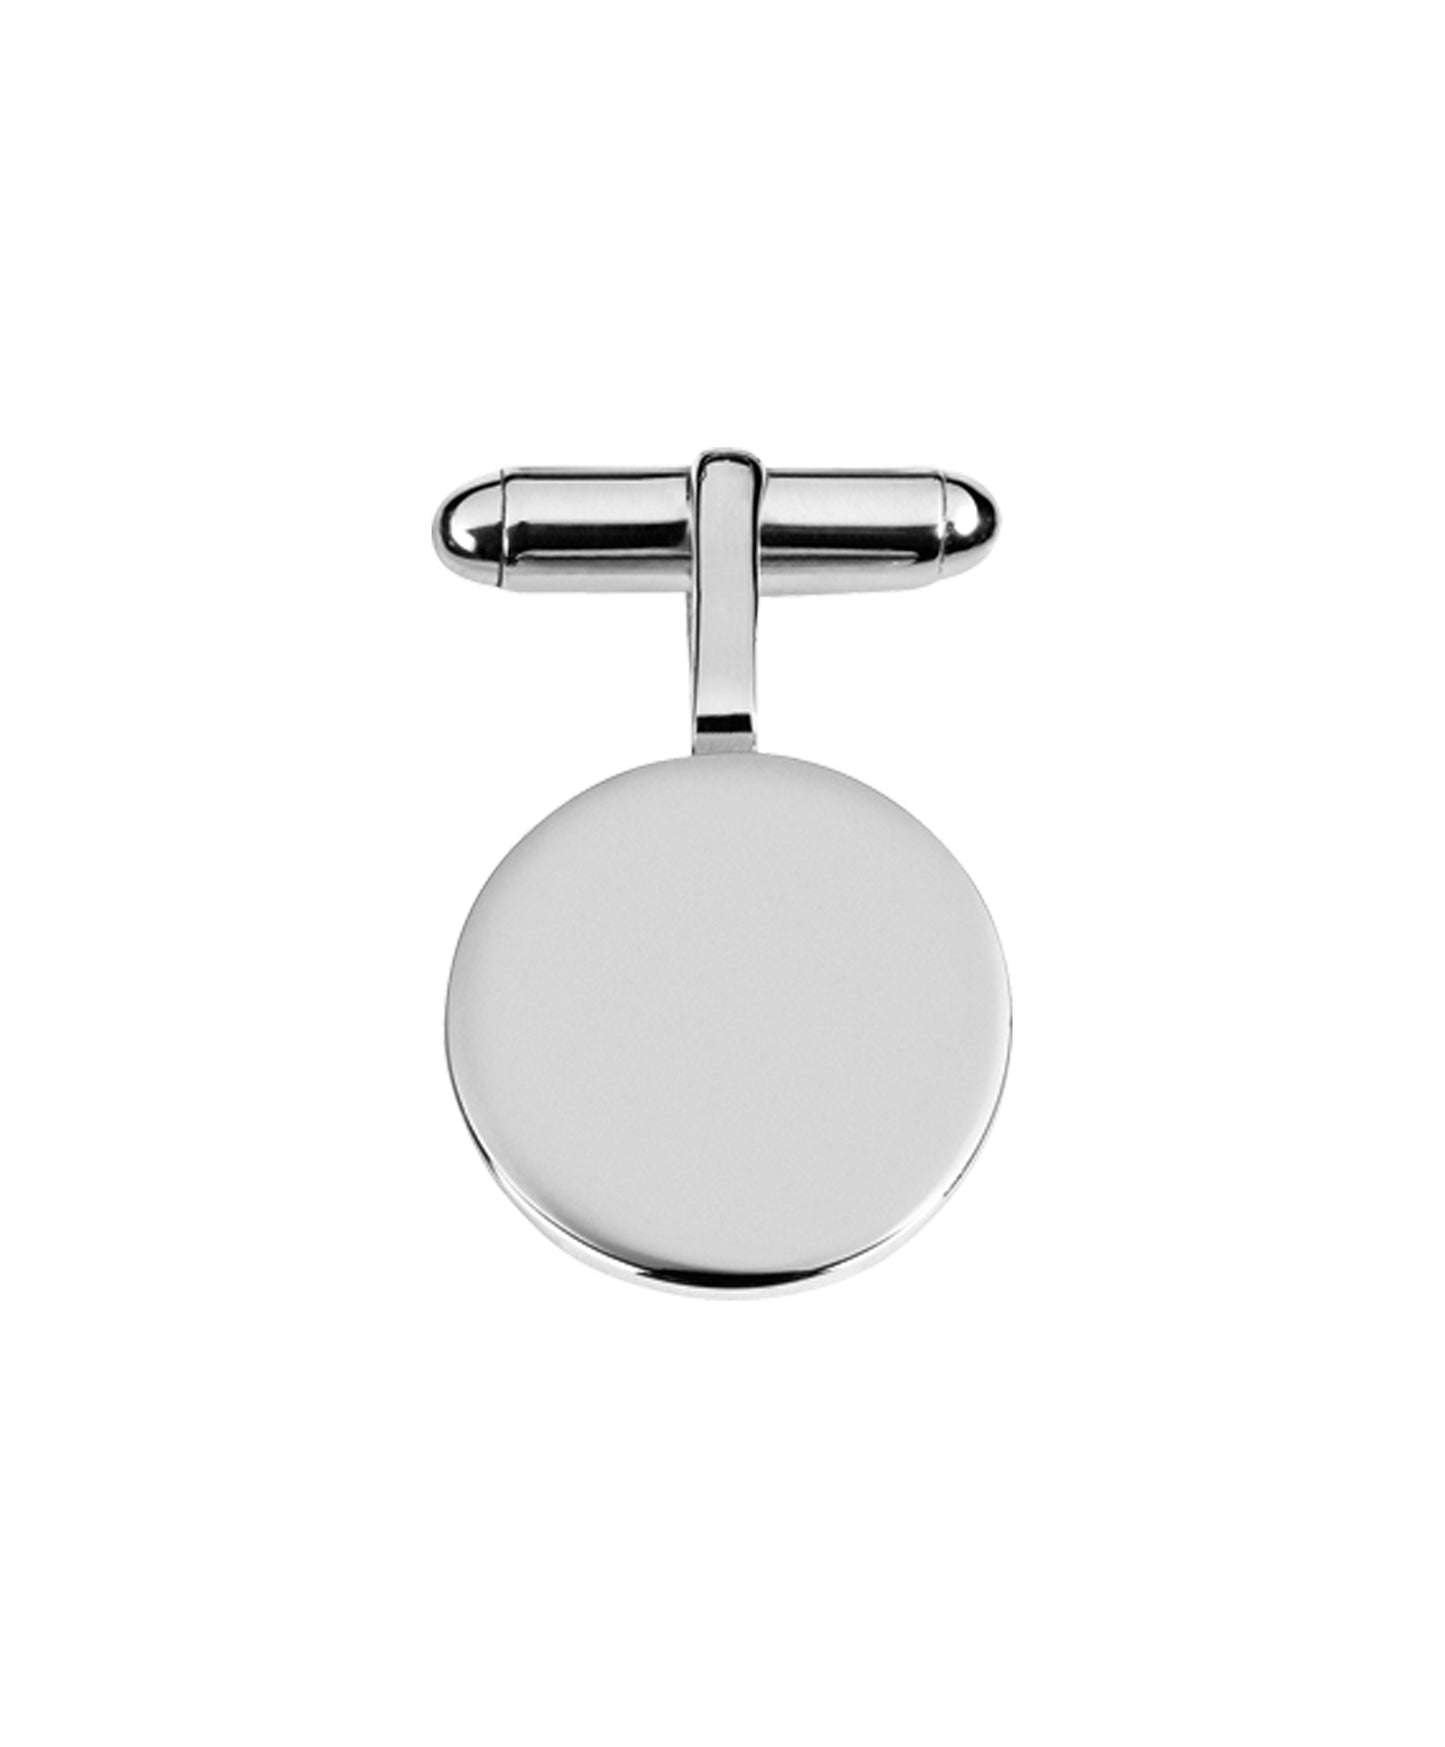 Pair of Round Cufflinks with 2mm Plates